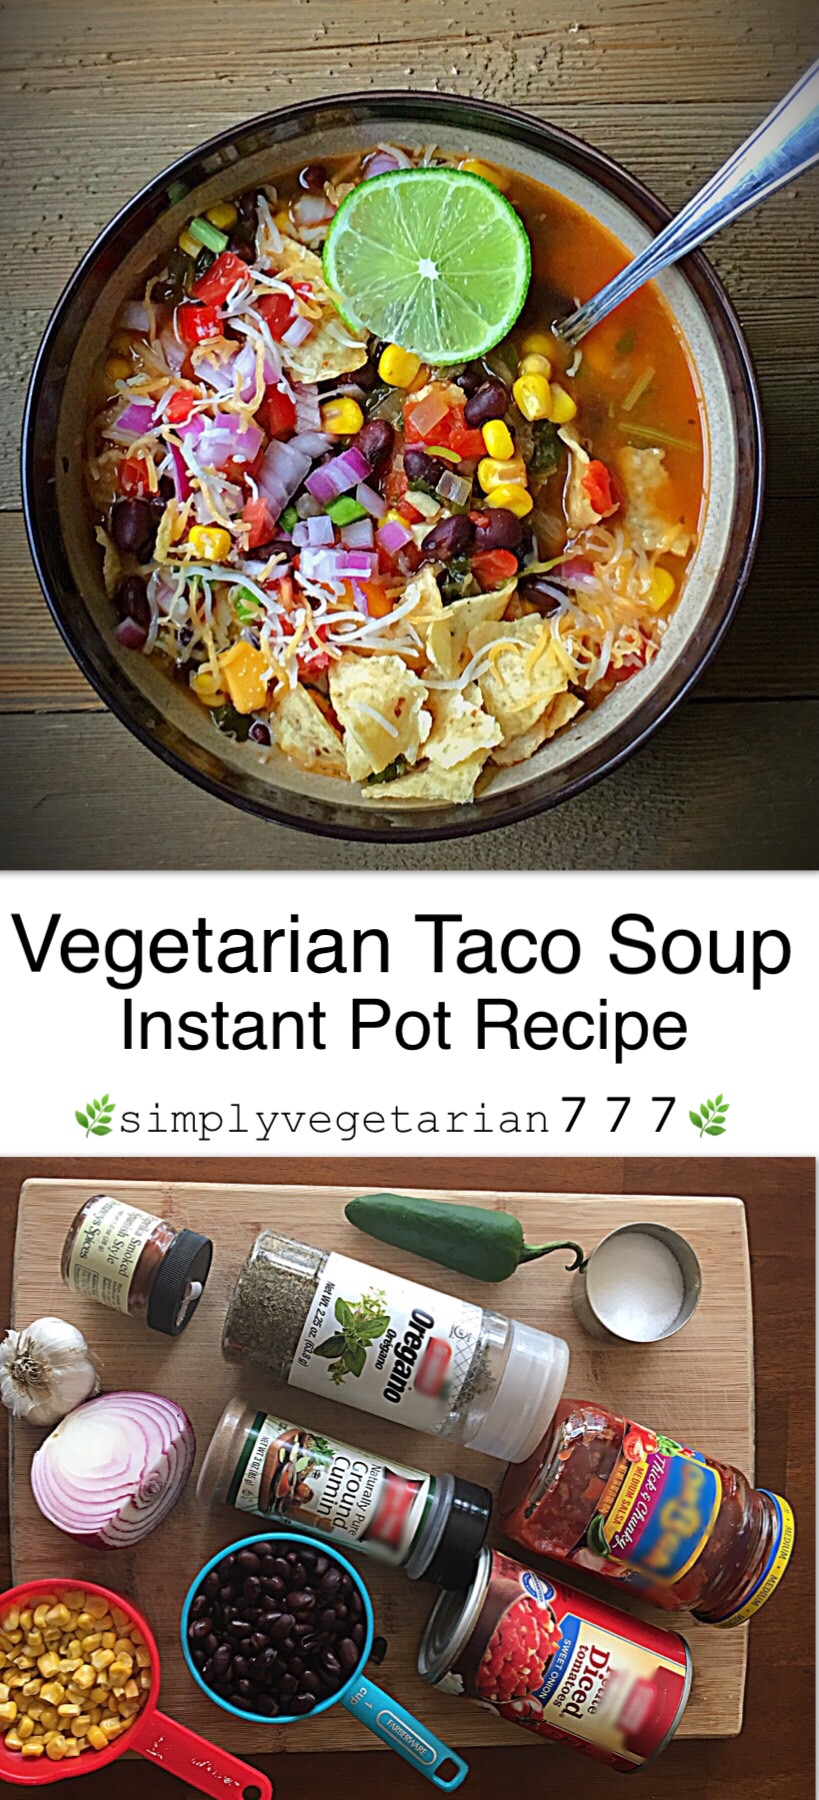 This Tex Mex Style Vegetarian Taco Soup Instant Pot Recipe is very easy & simple to make. It is bold and full of flavors. Stove Top cooking Instructions and Video is included for better understanding. #instantpotsoup #instantpotvegetarianrecipes #tacosoup #texmex #vegetariansoup